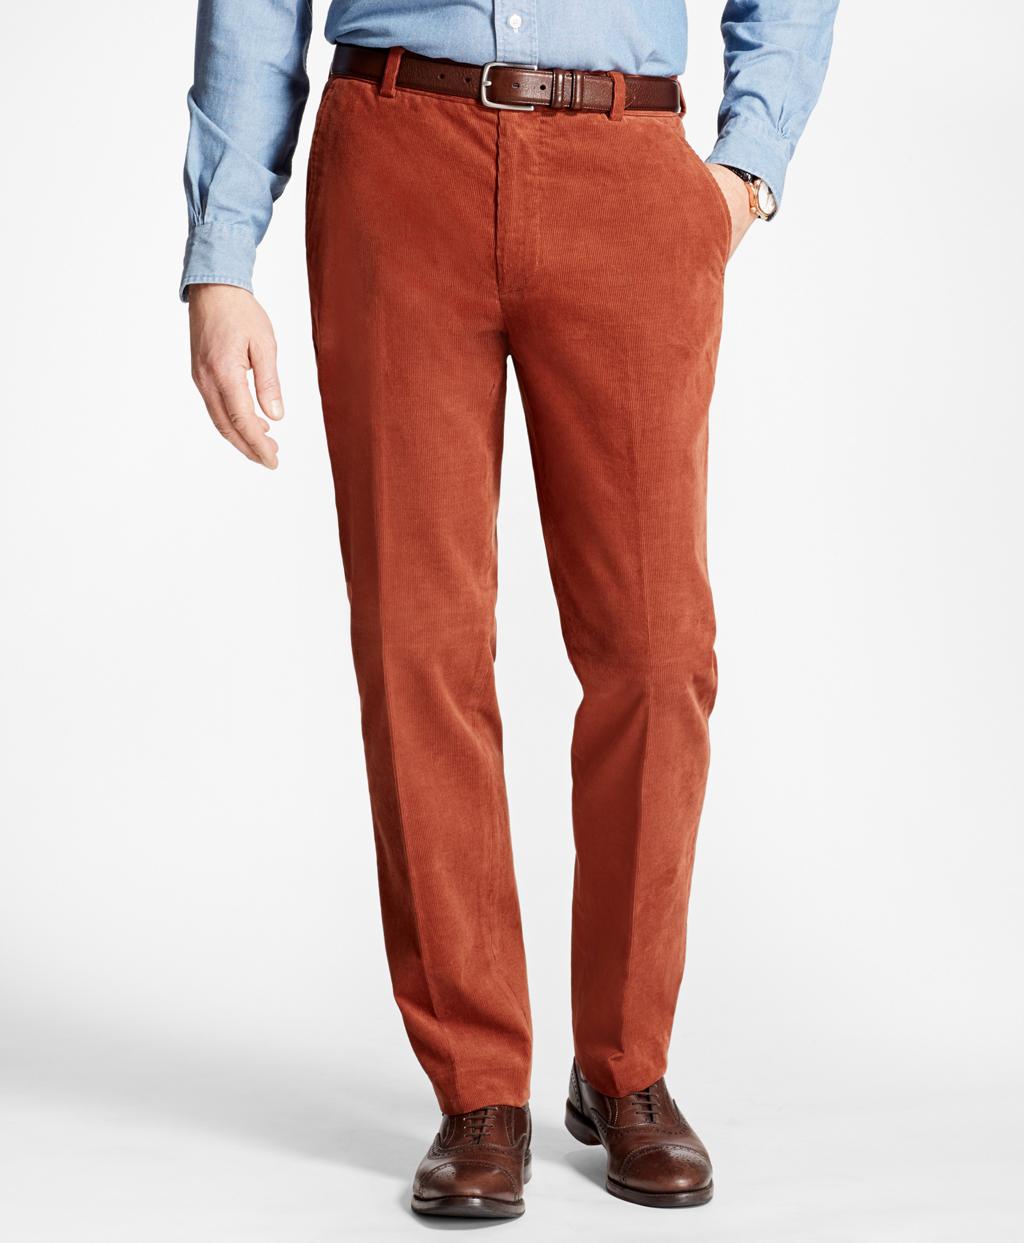 Lyst - Brooks Brothers Clark Fit Fine Wale Stretch Corduroys in Brown ...